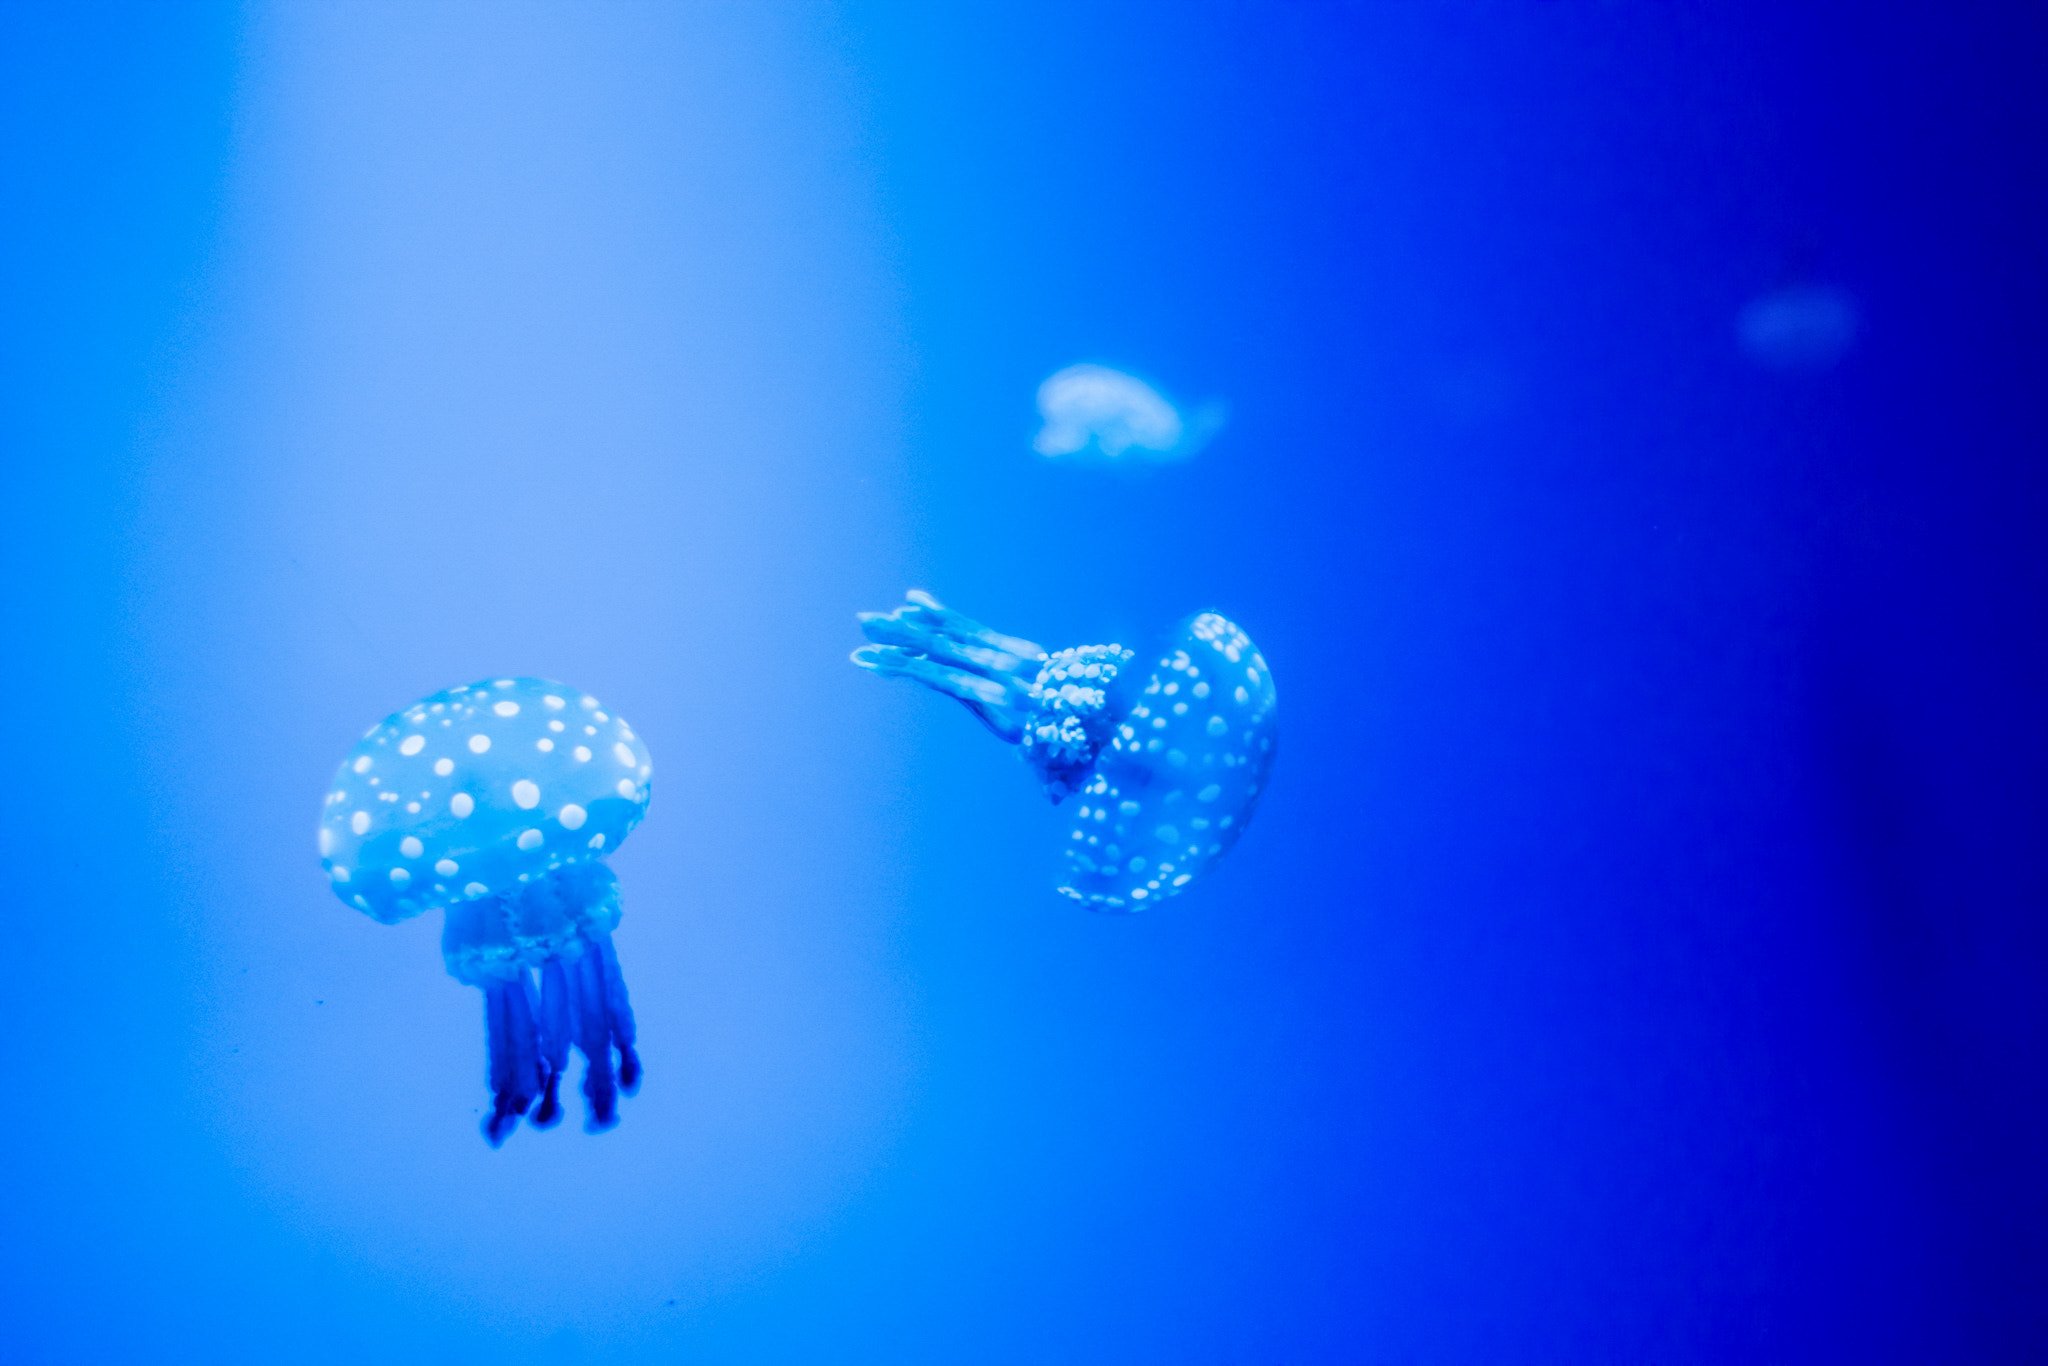 Samsung NX1 + Samsung NX 16-50mm F3.5-5.6 Power Zoom ED OIS sample photo. Jellyfish in blue water photography